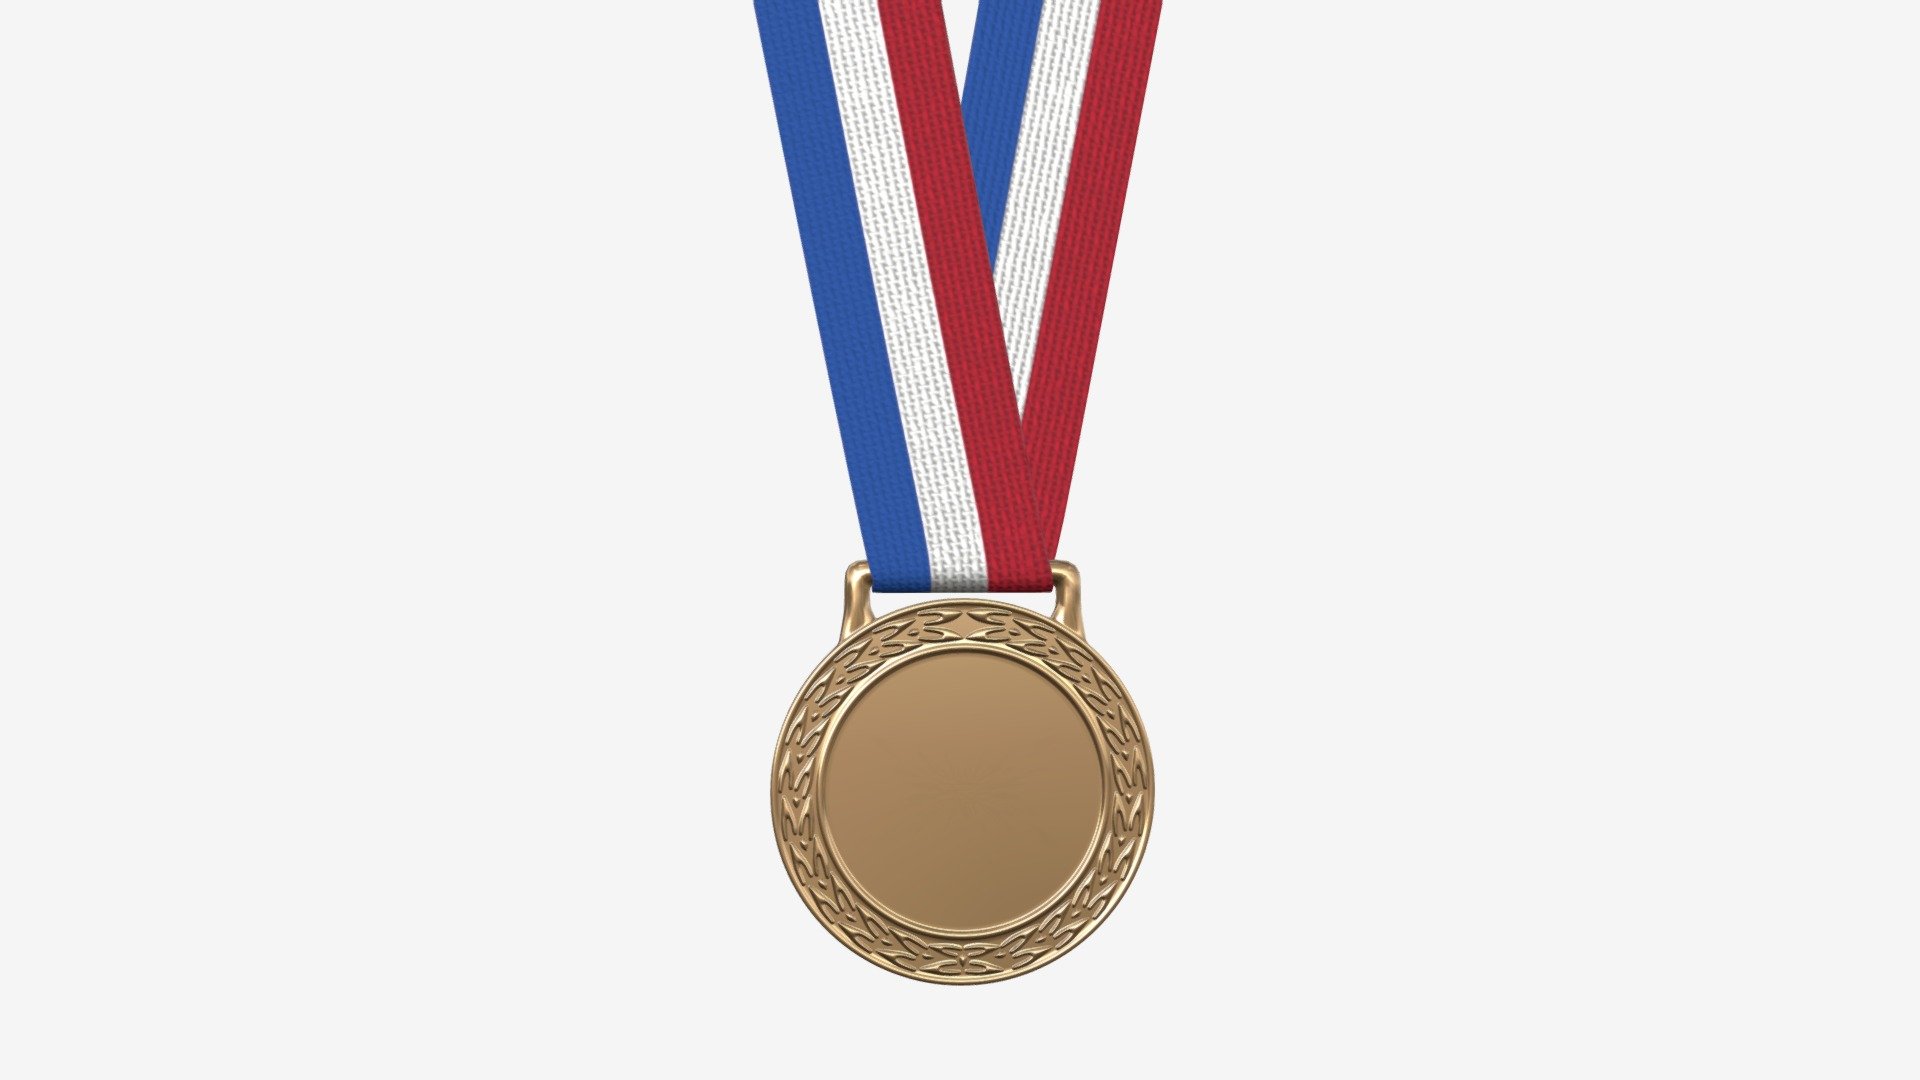 Sporting medals